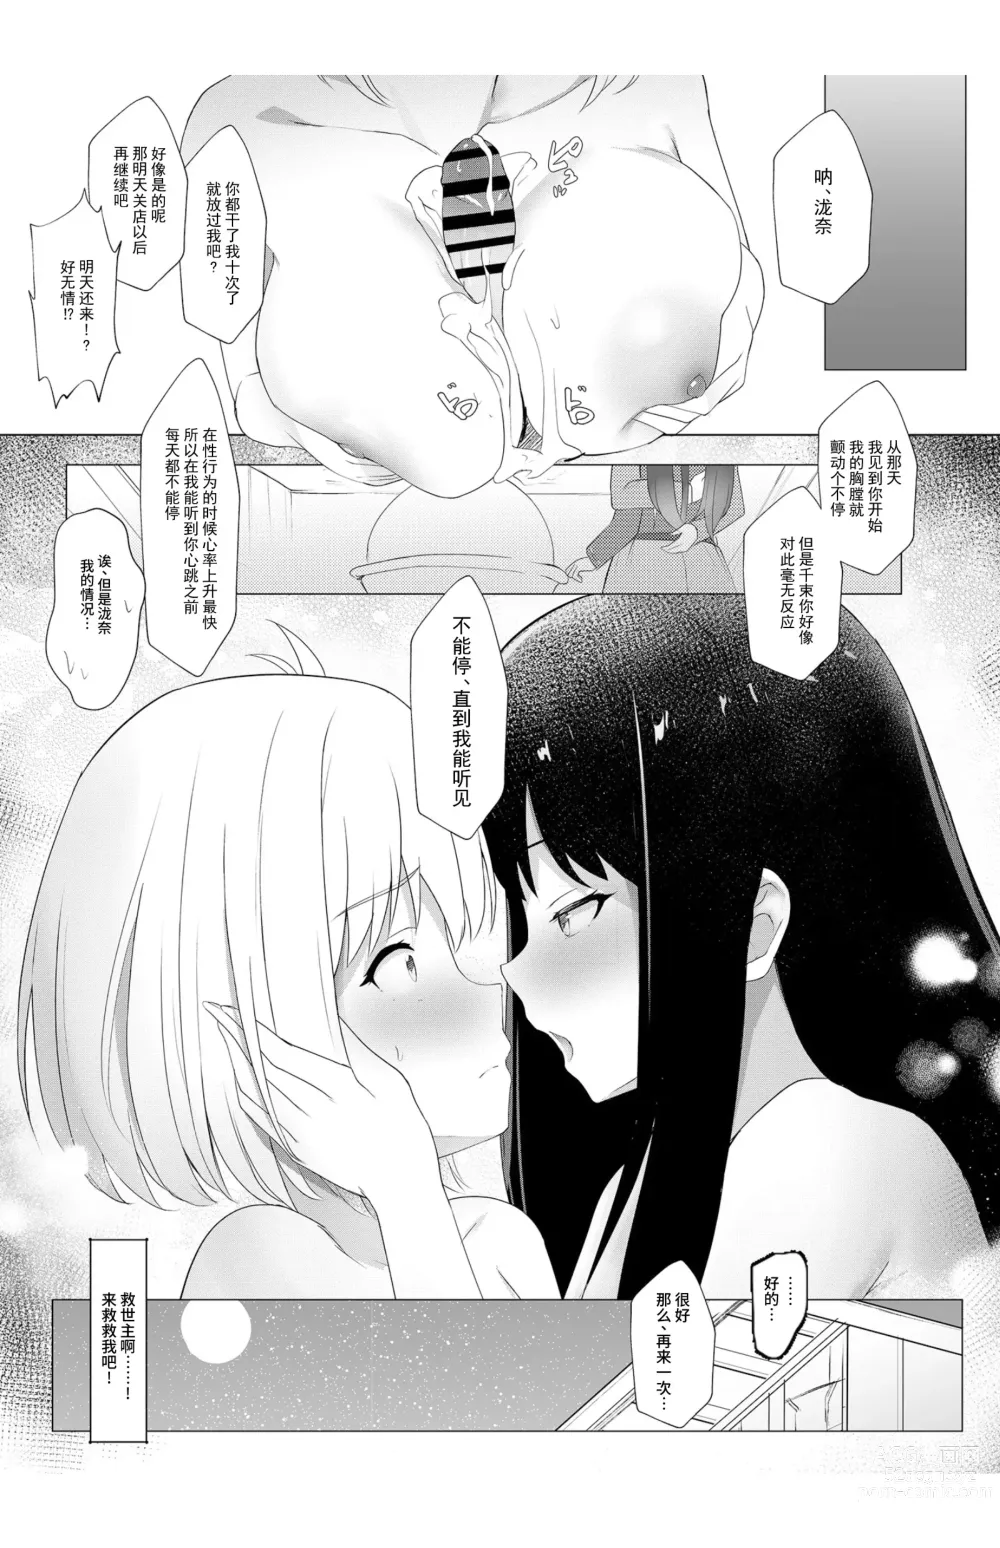 Page 17 of doujinshi 你的心跳 heart beat